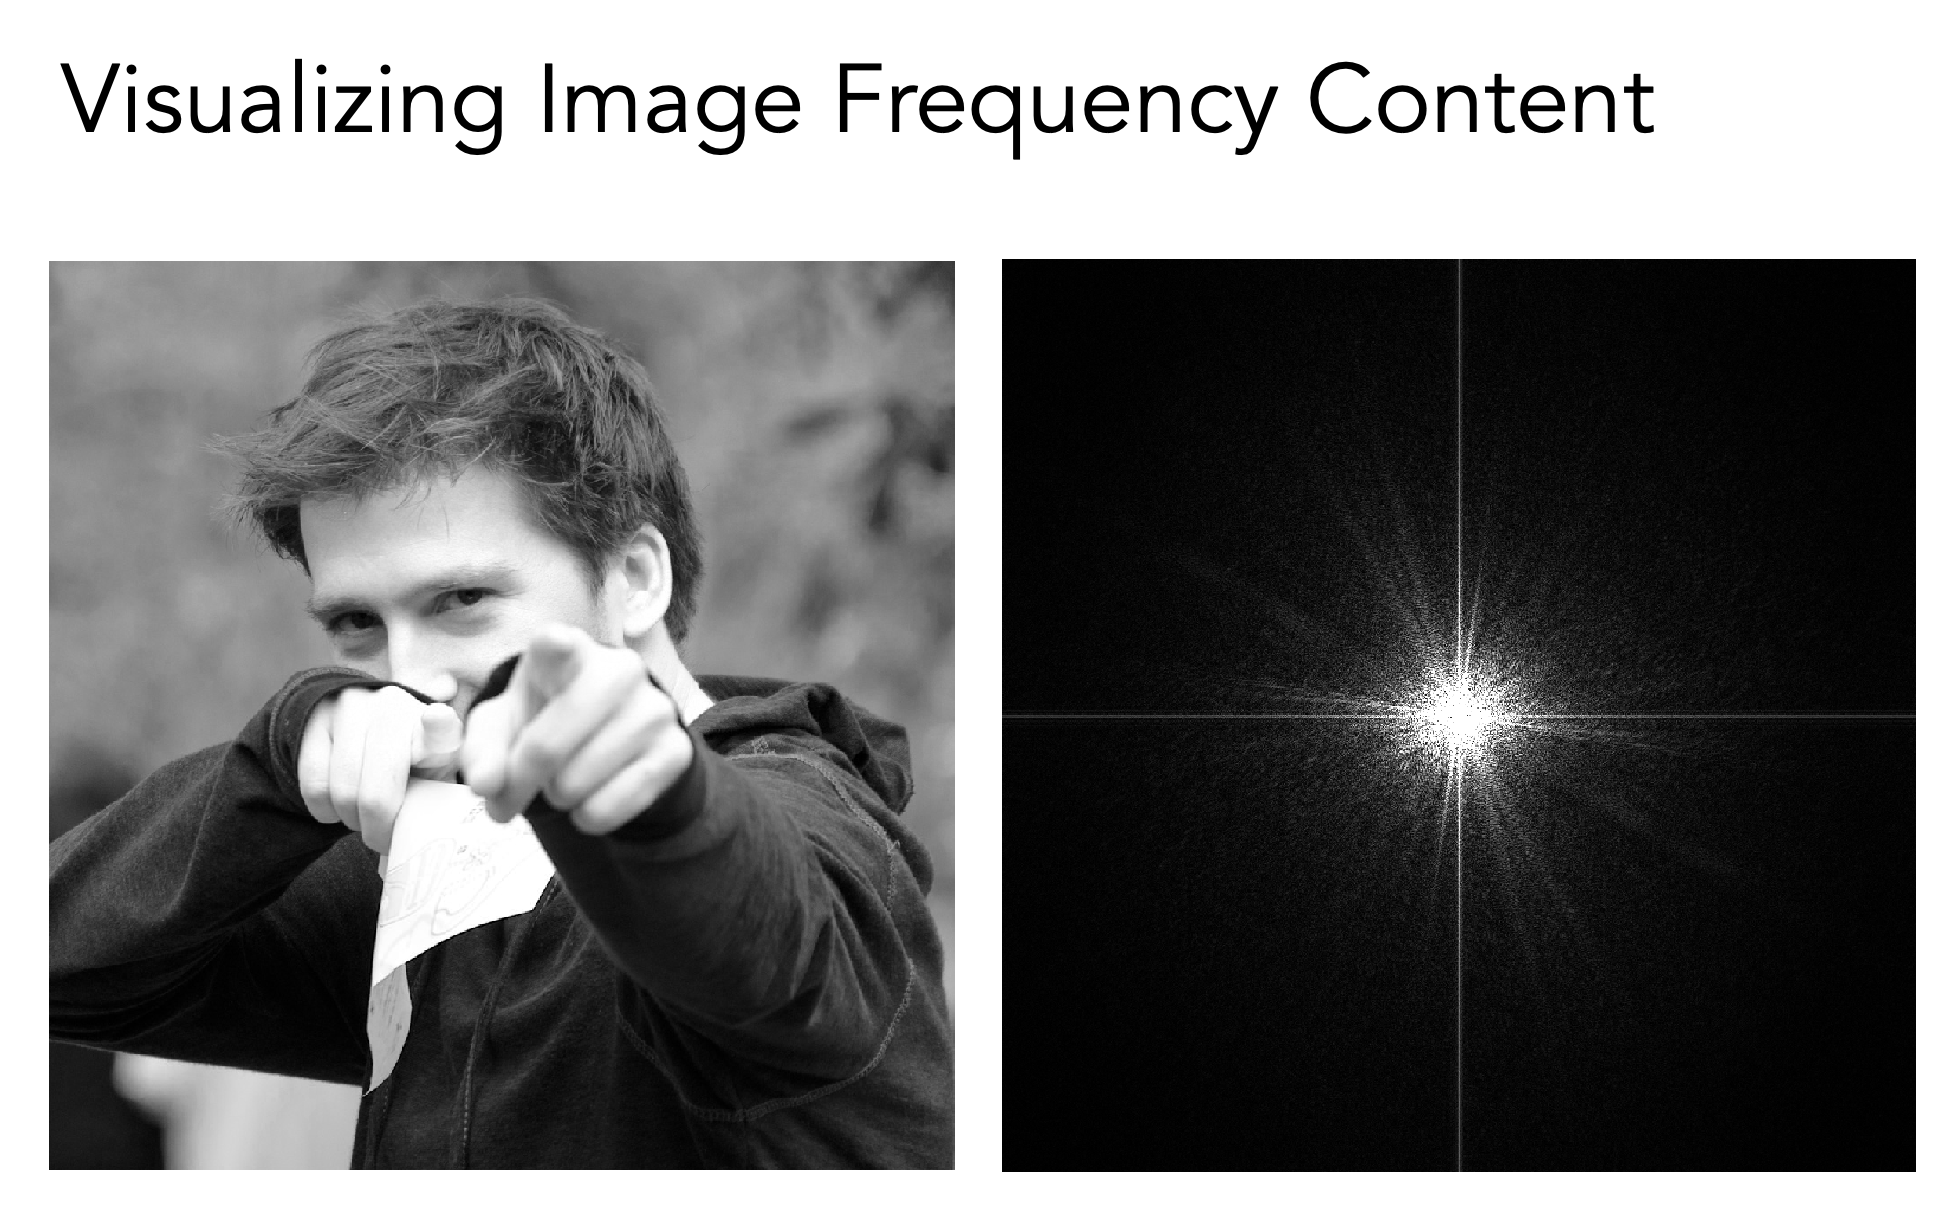 Viasualizing Image Frequency Content